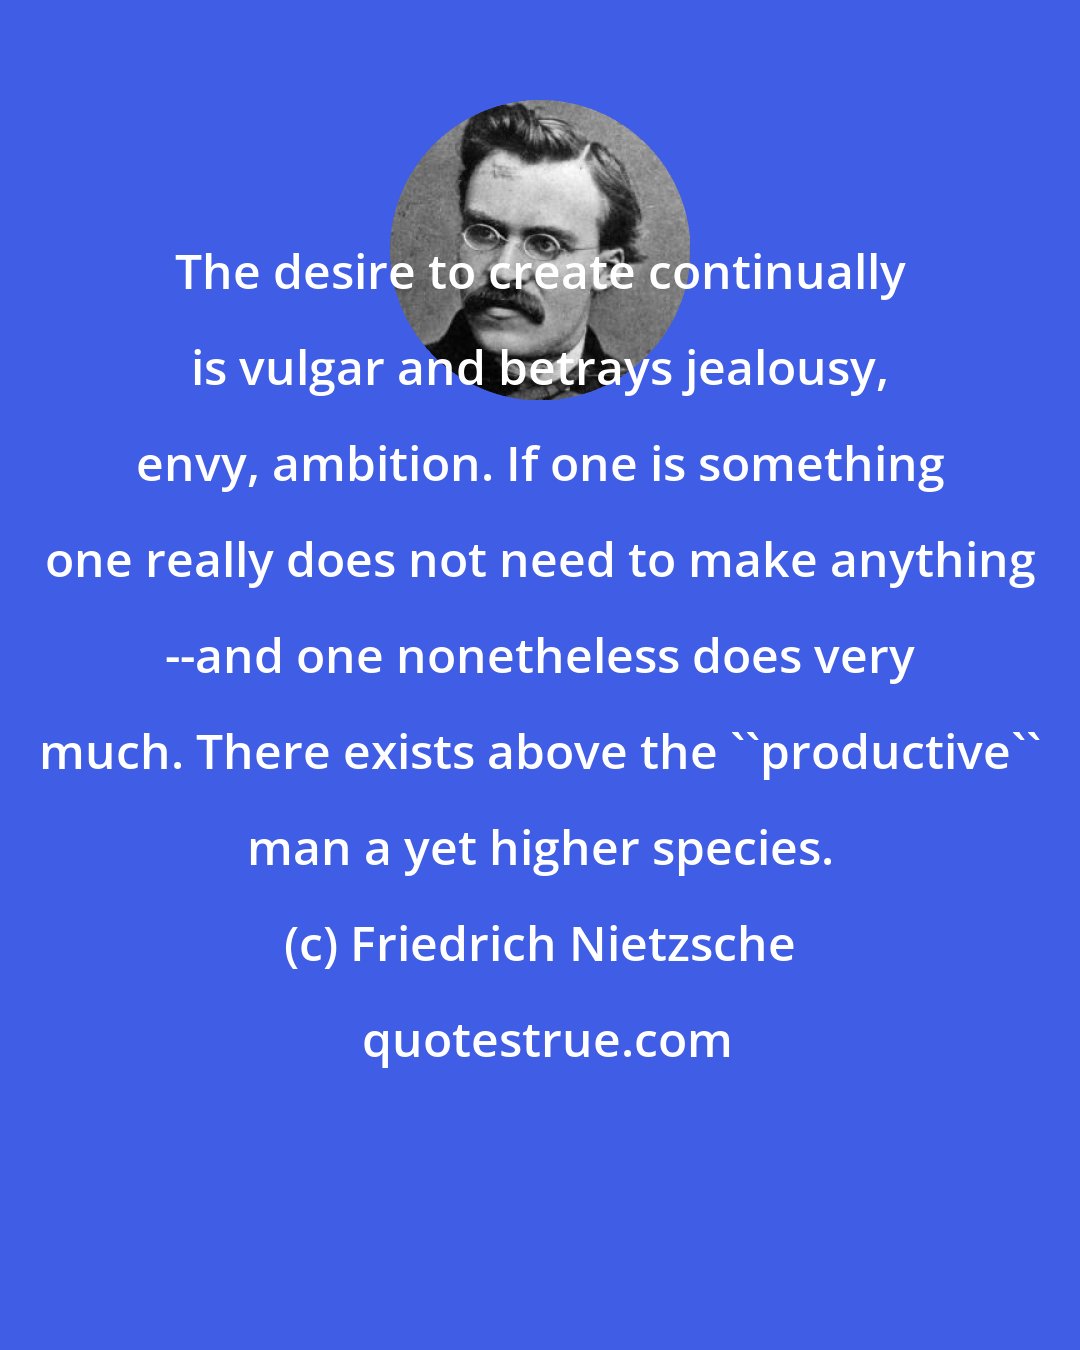 Friedrich Nietzsche: The desire to create continually is vulgar and betrays jealousy, envy, ambition. If one is something one really does not need to make anything --and one nonetheless does very much. There exists above the ''productive'' man a yet higher species.